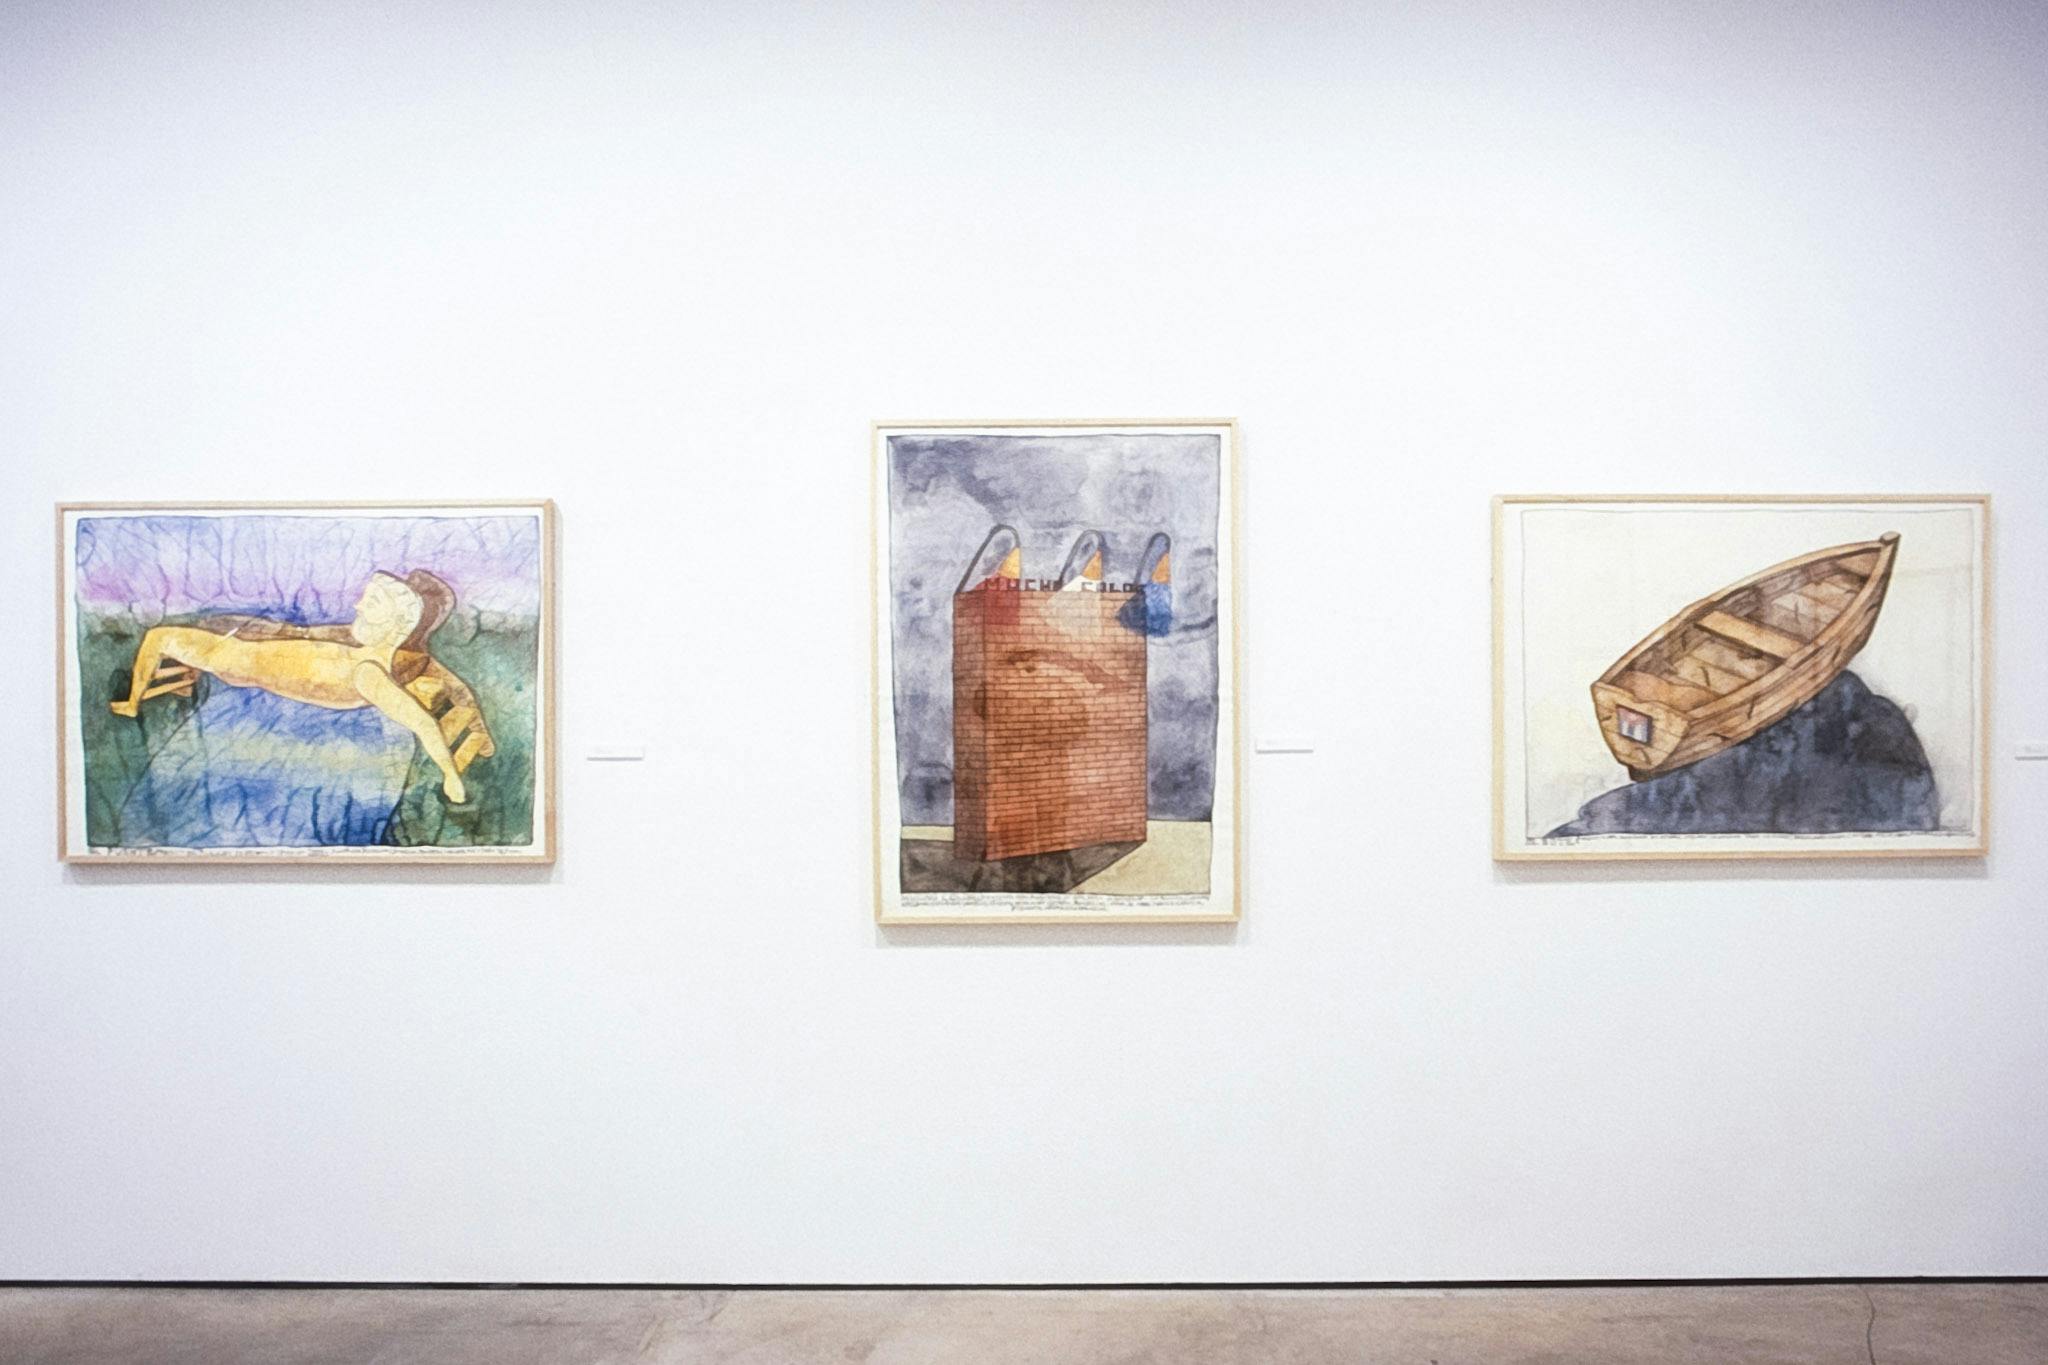 Three colored drawings are installed on the gallery wall. The left one shows a human body bridging over the river, and the middle one depicts a brick wall. The one on the right depicts a wooden boat.